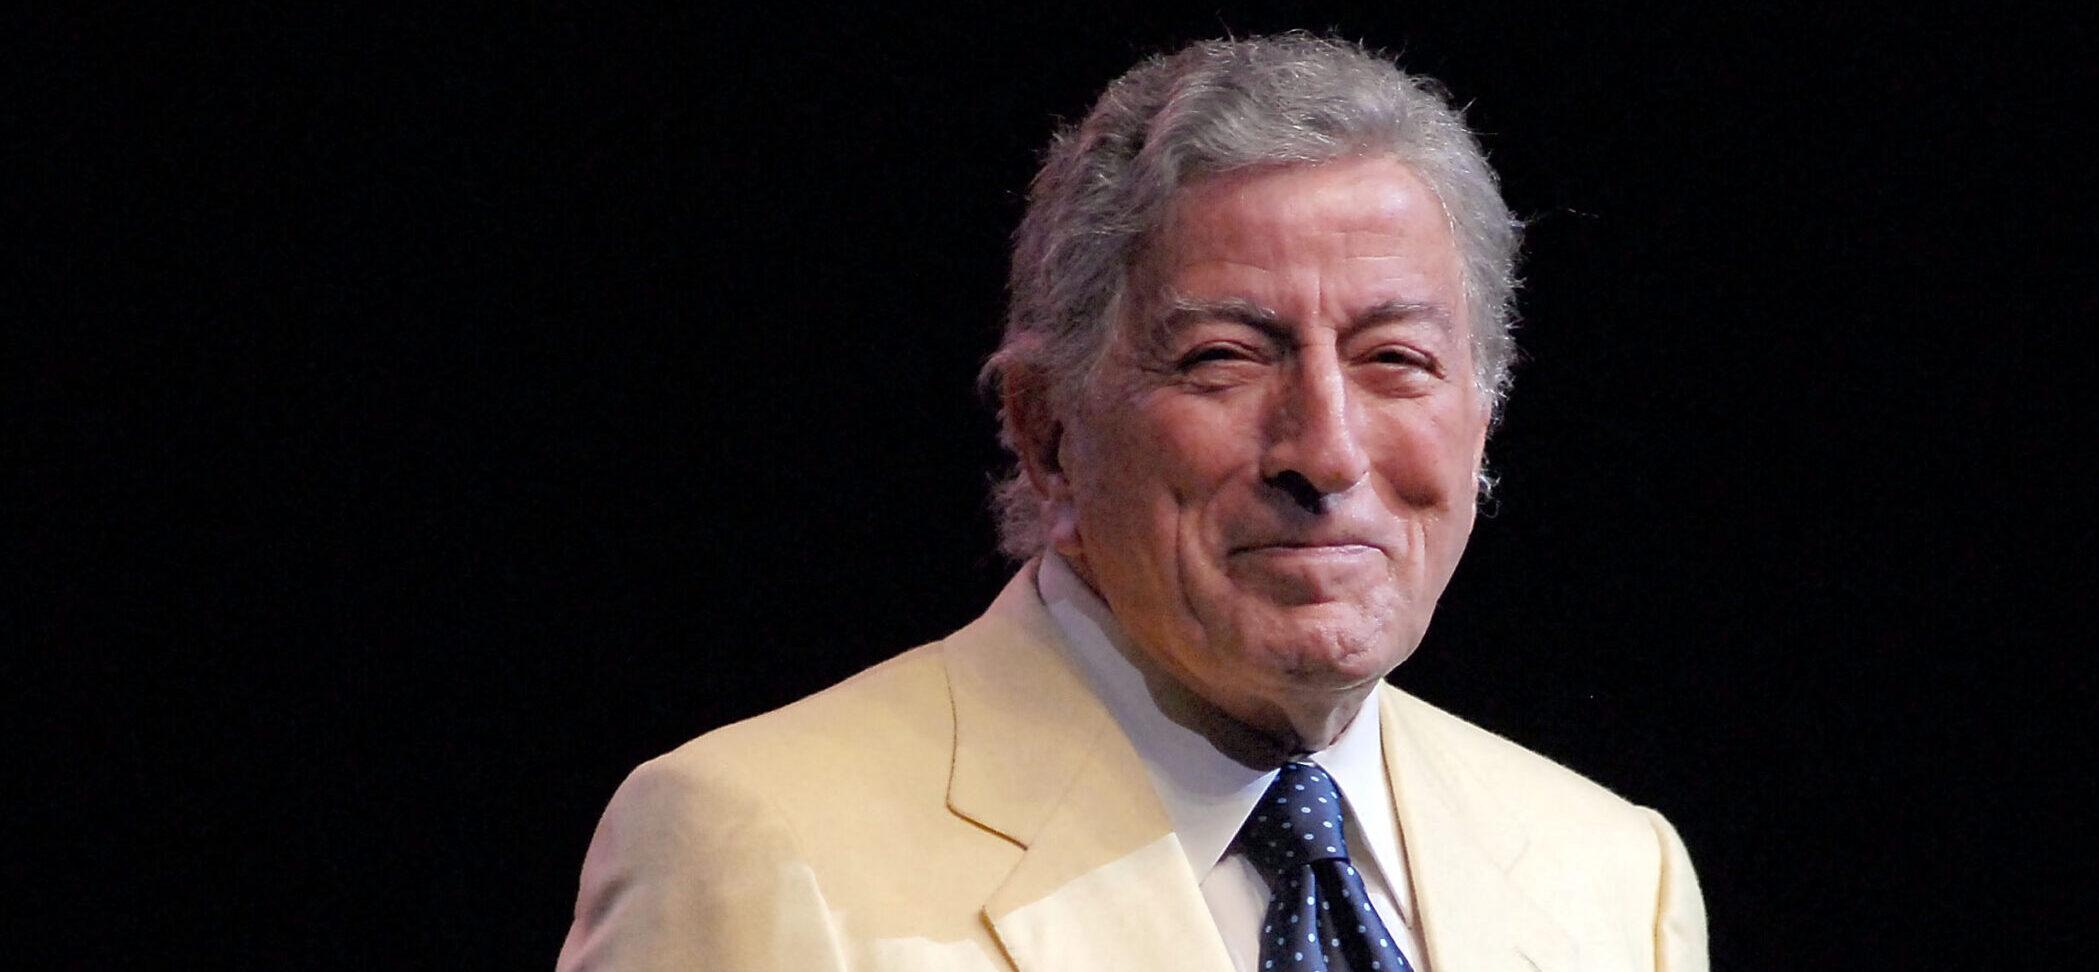 Singer Tony Bennett performs at Hard Rock Live! in Hollywood, Florida